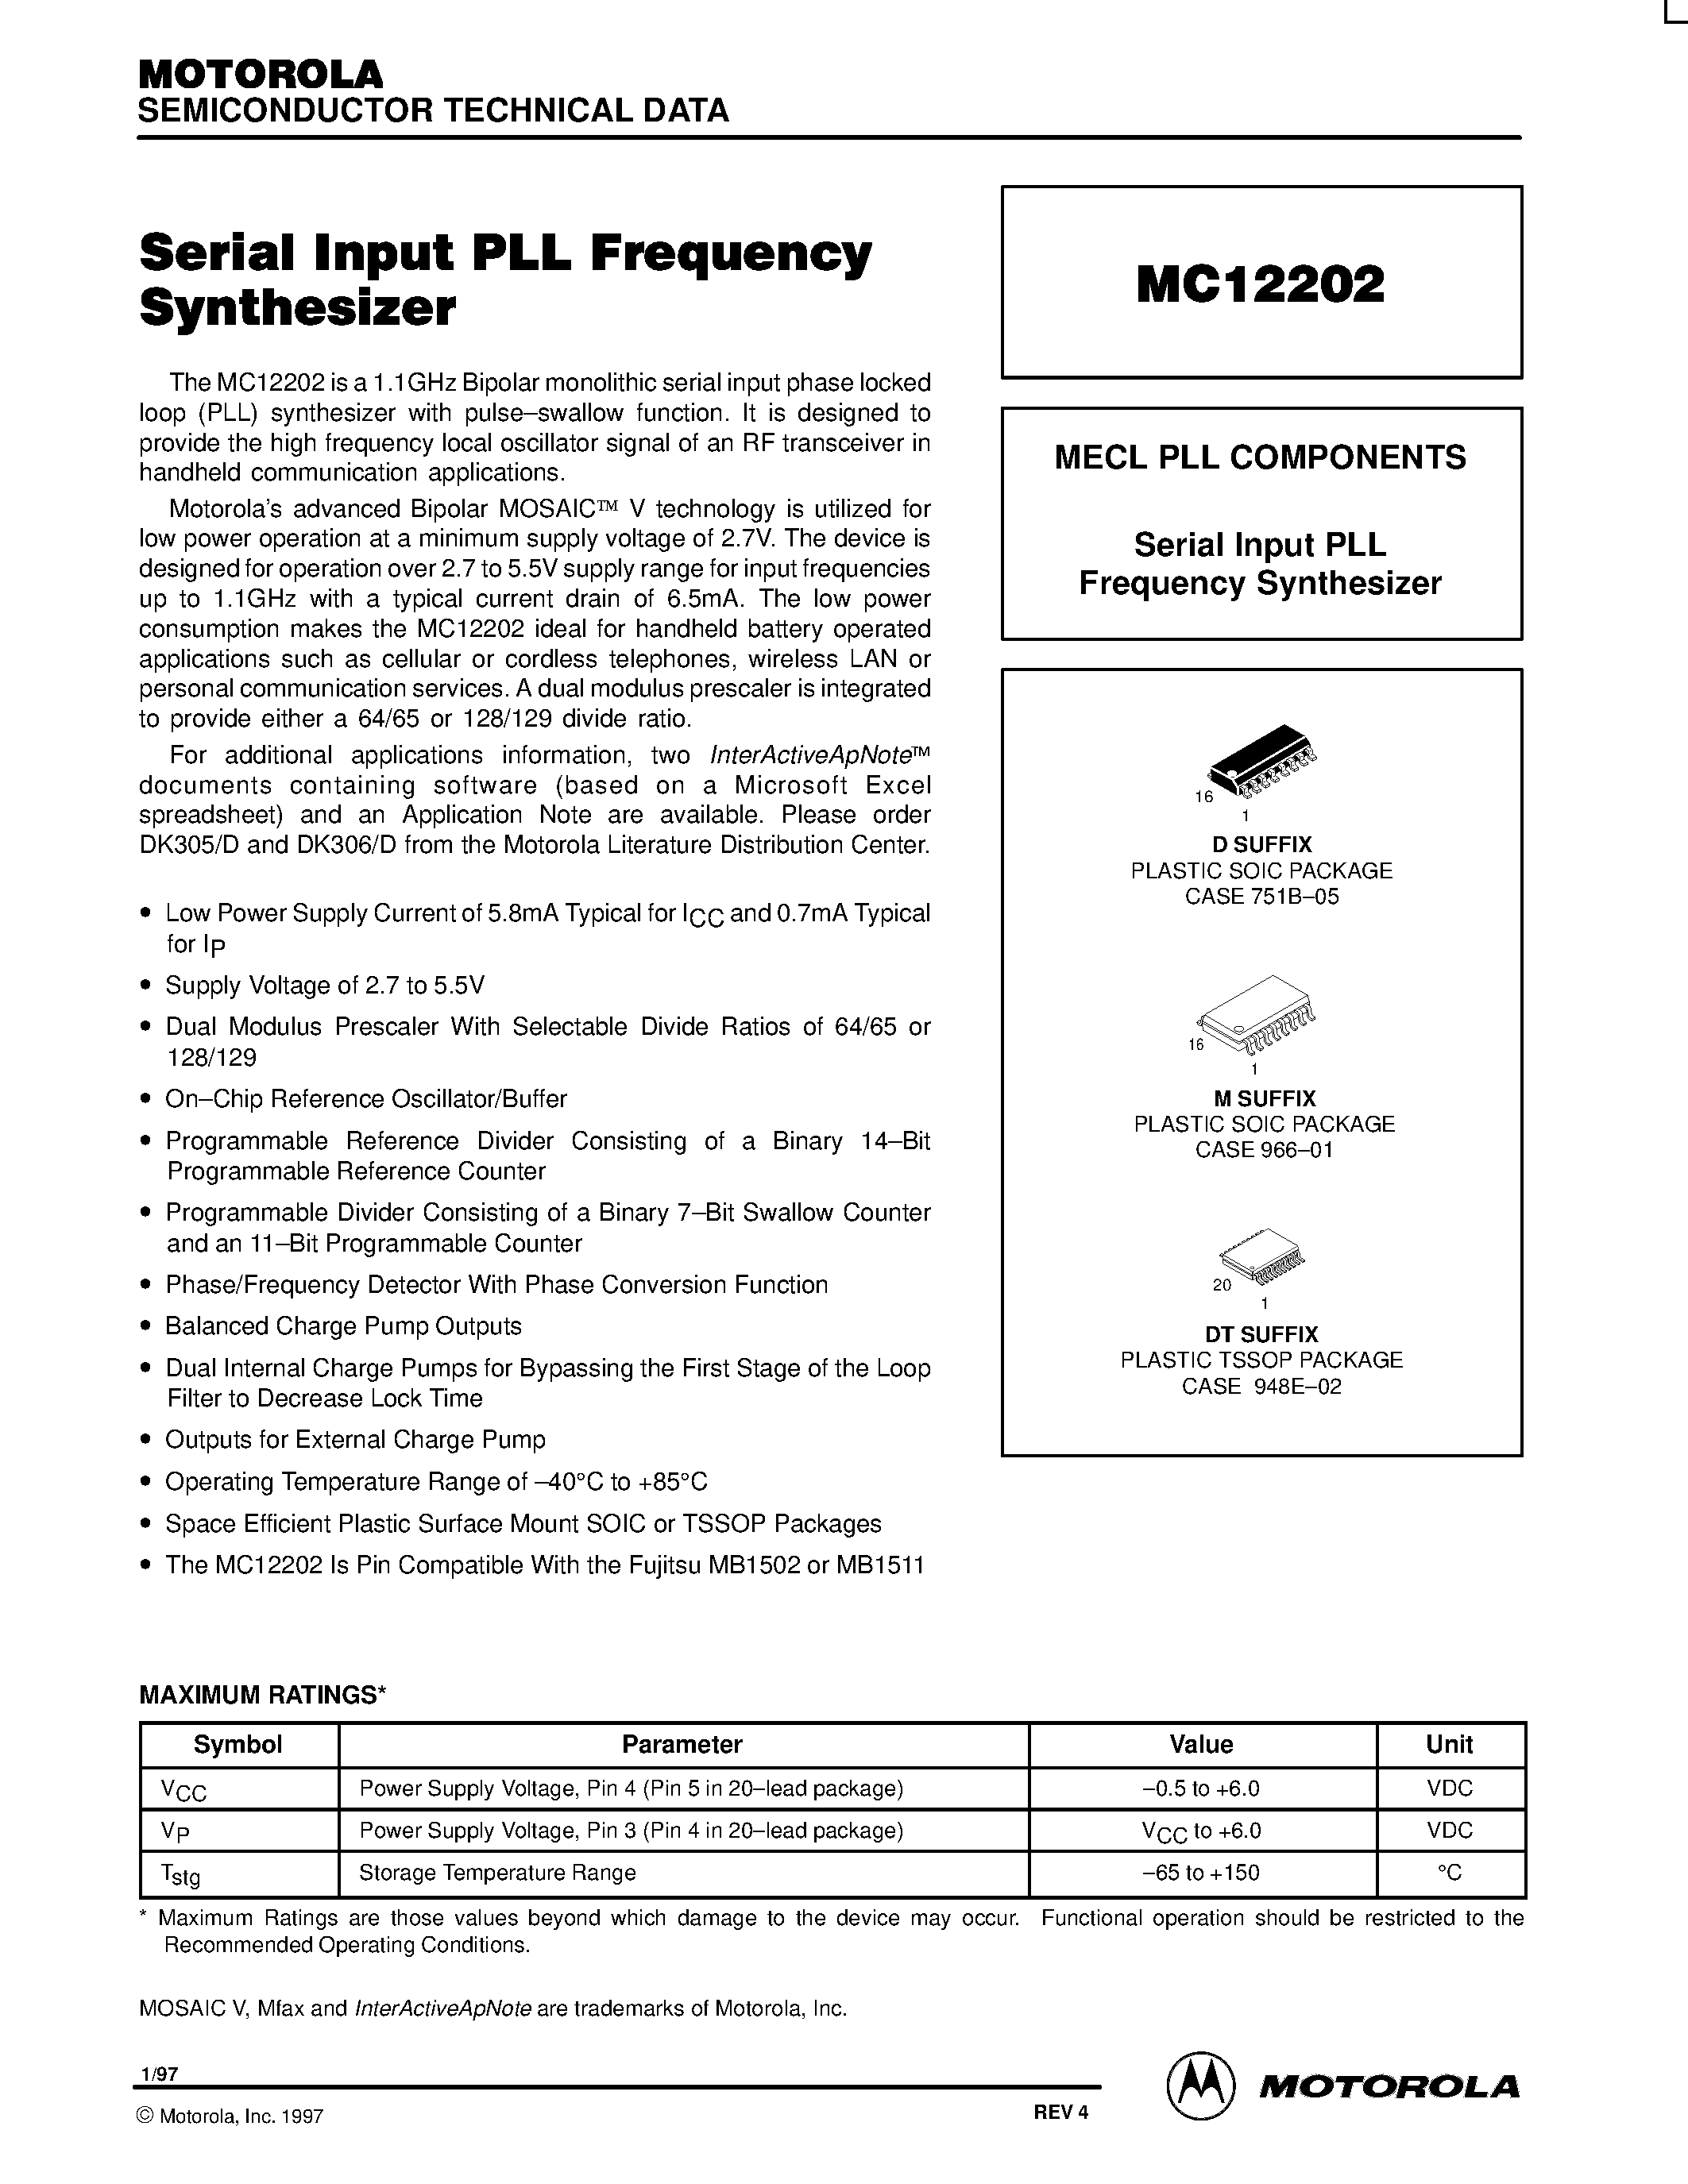 Datasheet MC12202 - MECL PLL COMPONENTS Serial Input PLL Frequency Synthesizer page 1